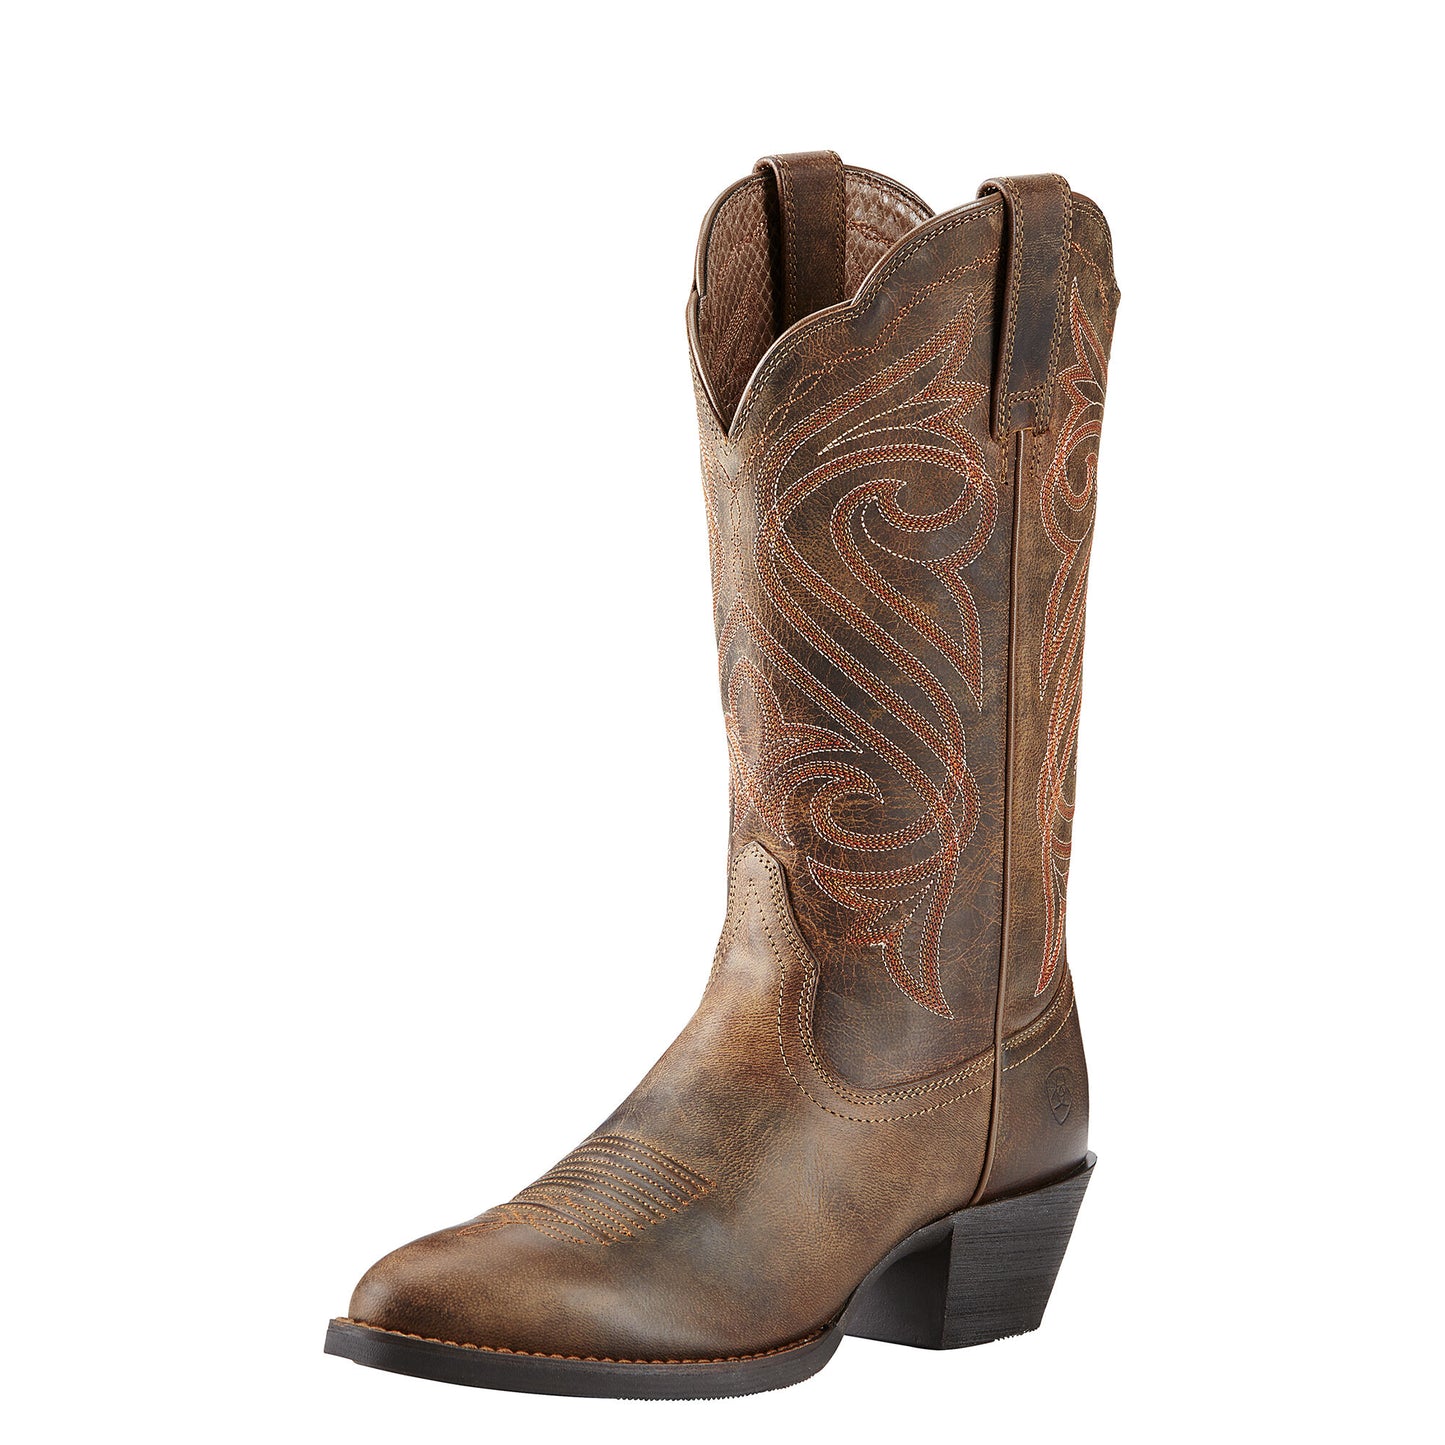 Ariat Women's Round Up R-Toe Boot - Dark Toffee - French's Boots